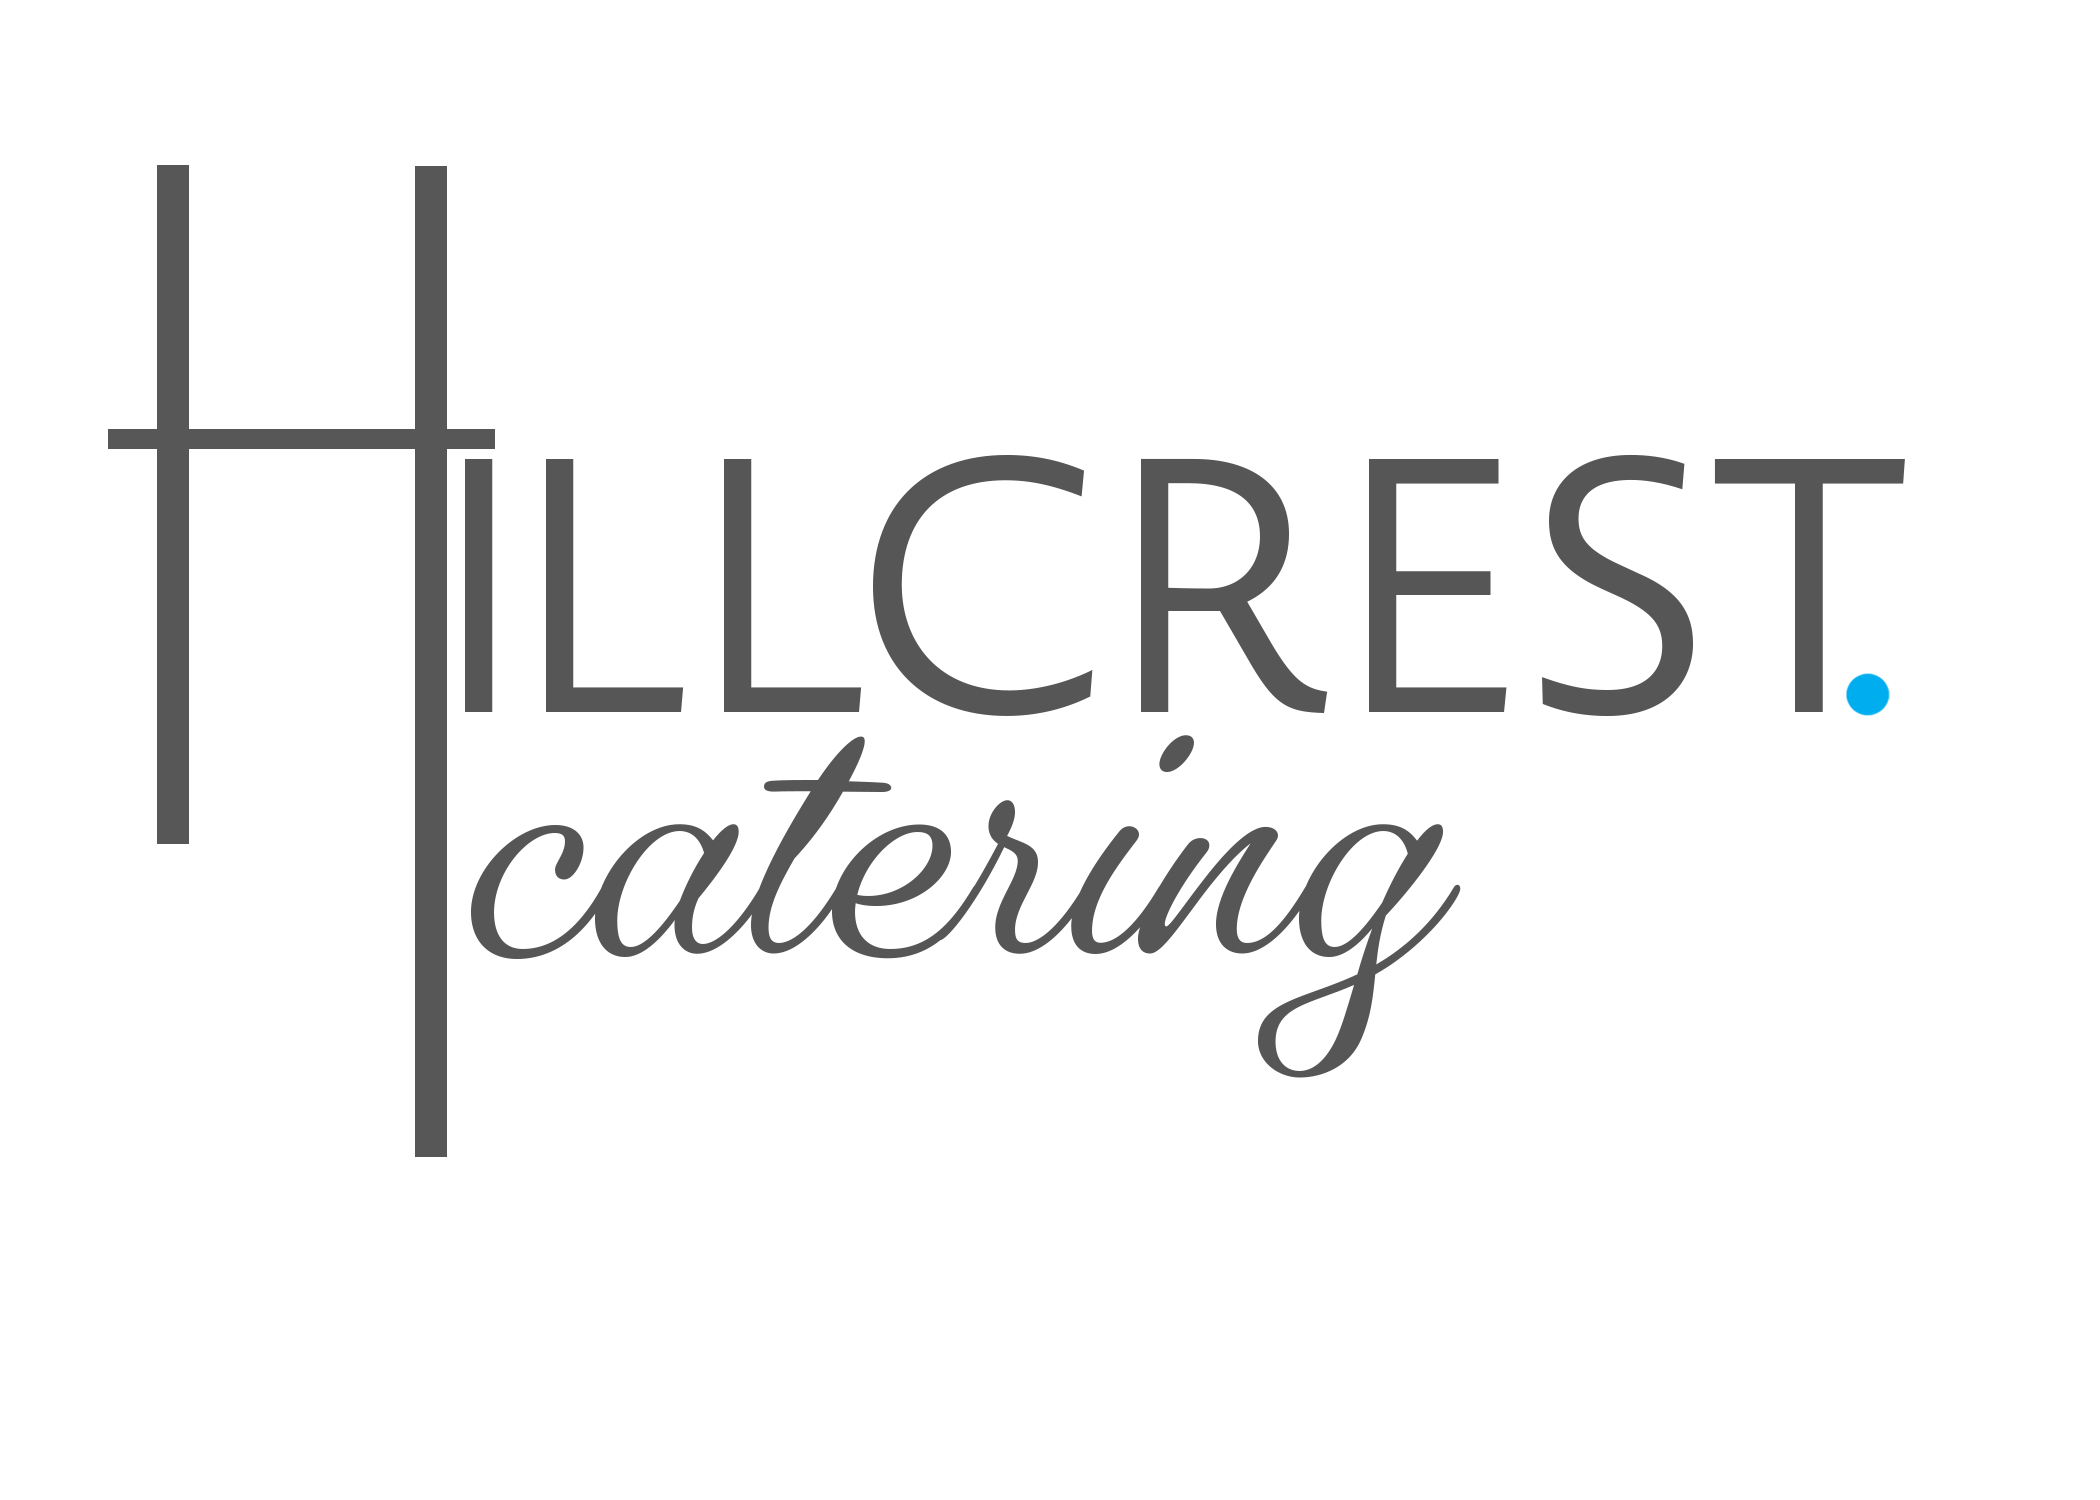 Hillcrest Catering